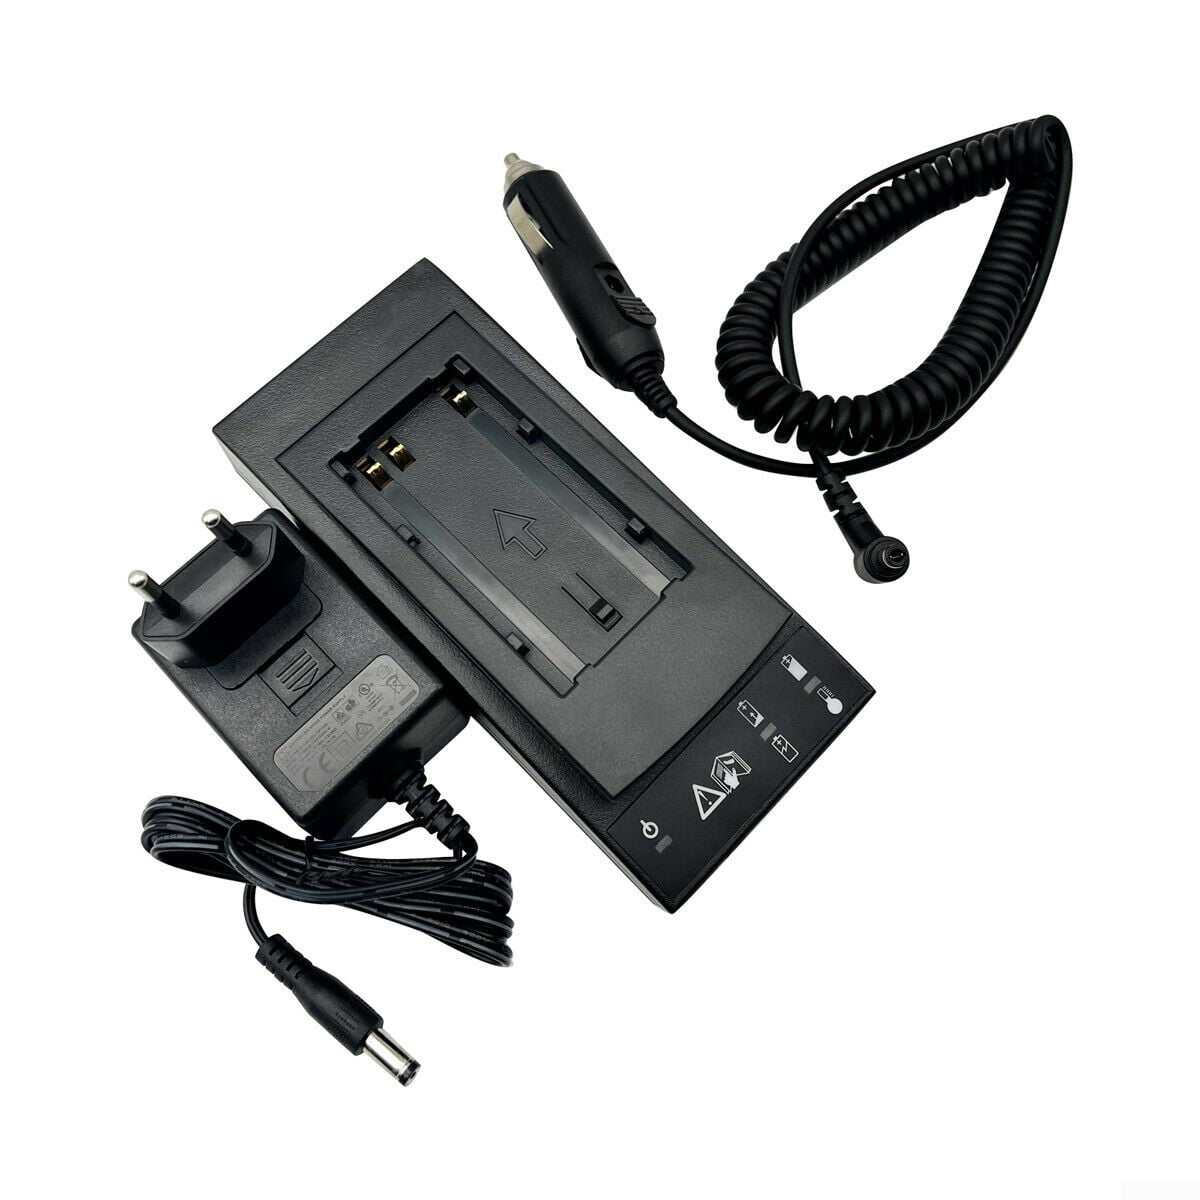 GEB212 BATTERY NEW US plug GKL211 CHARGER FOR LEICA GEB221 GEB211 